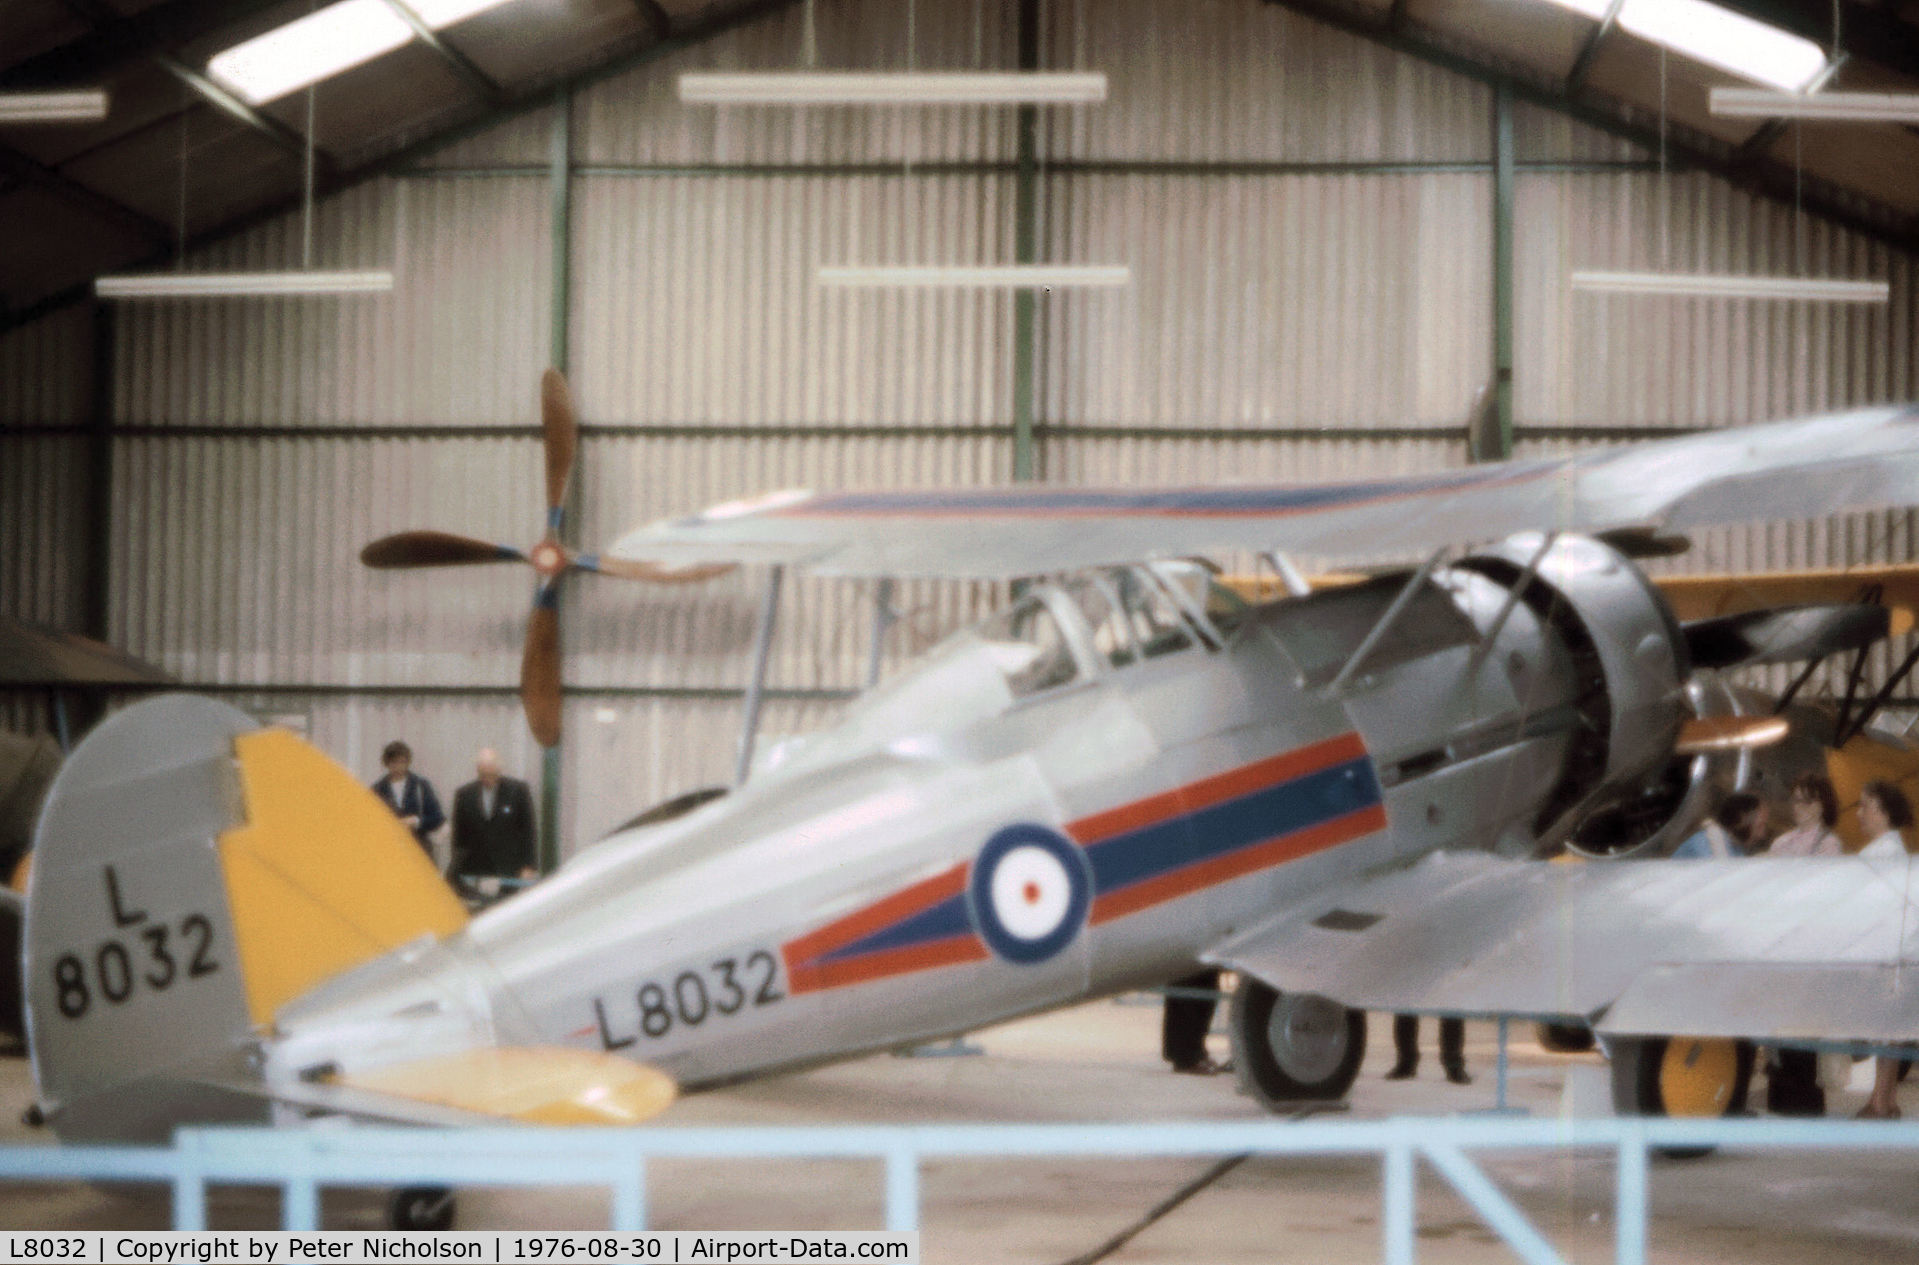 L8032, 1937 Gloster Gladiator Mk1 C/N [L8032], The Shuttleworth Collection's Gladiator as seen at Old Warden in the Summer of 1976.